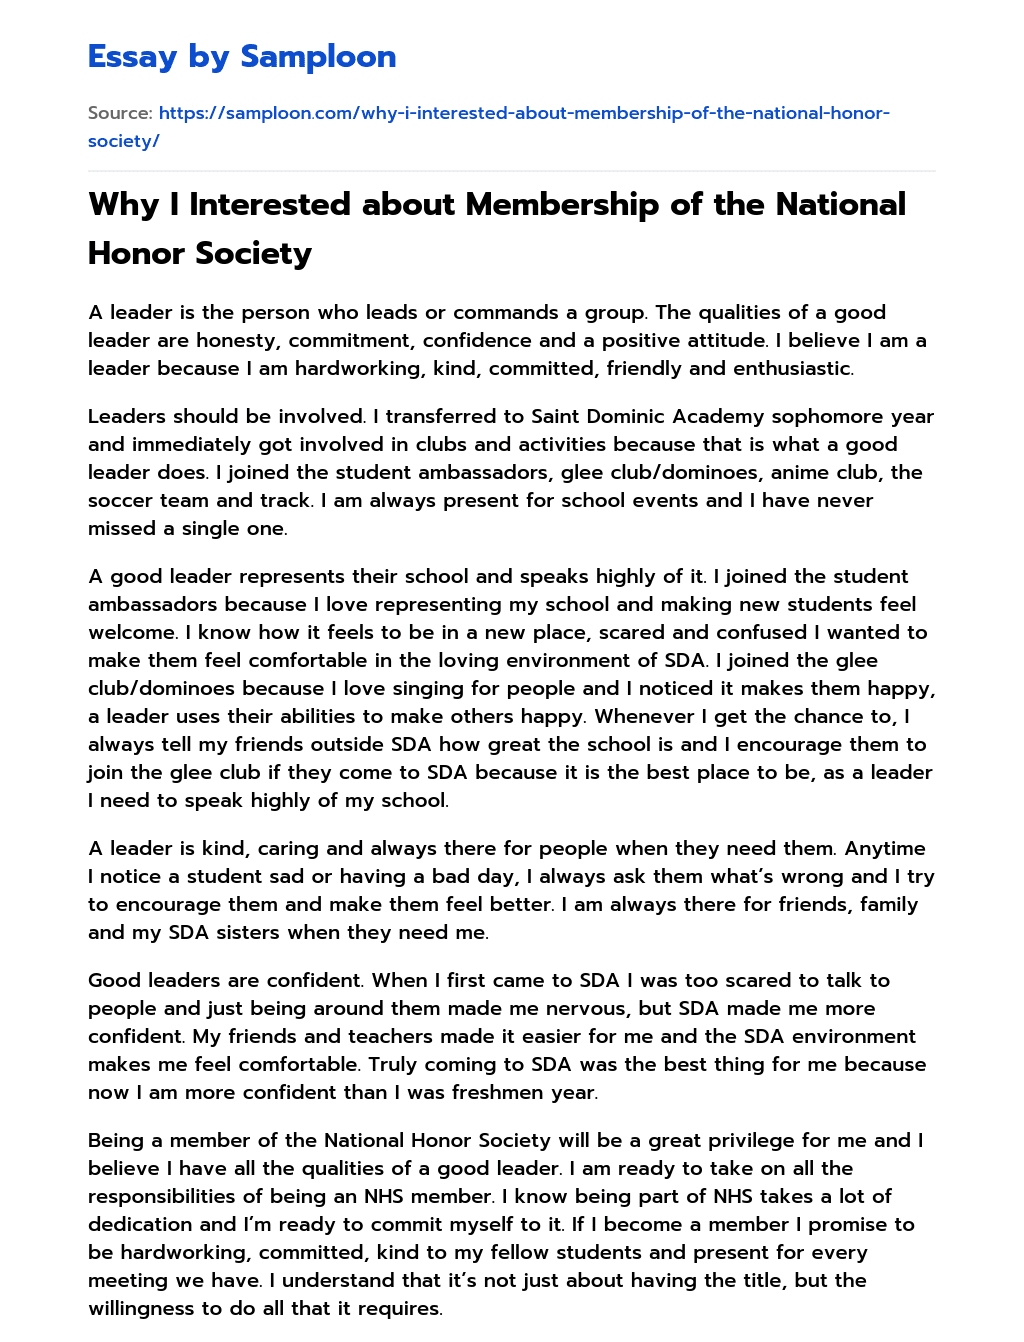 Why I Interested about Membership of the National Honor Society essay